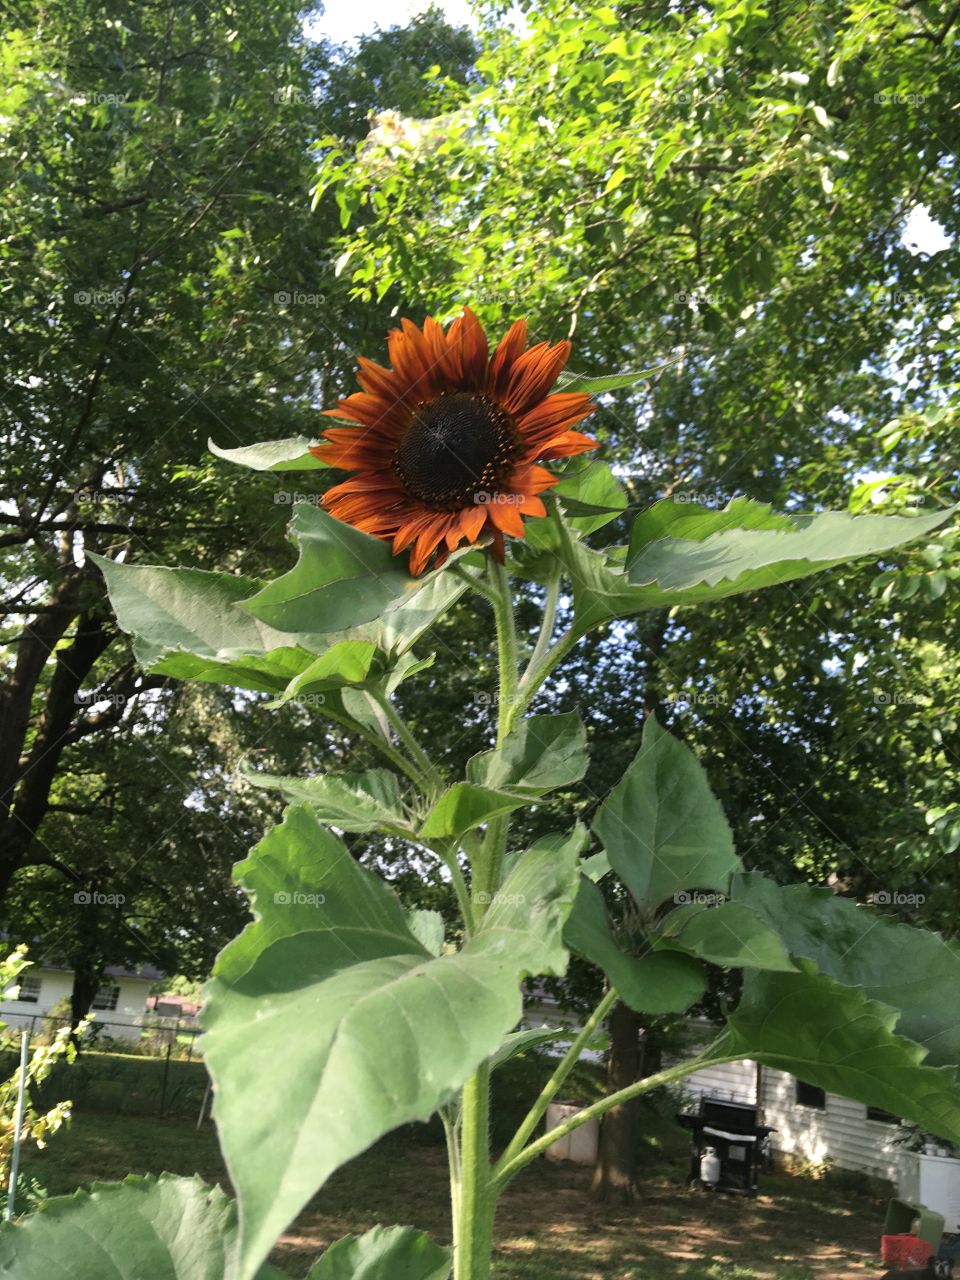 Happy Friday! This is supposed to be a purple sunflower instead it looks like this.